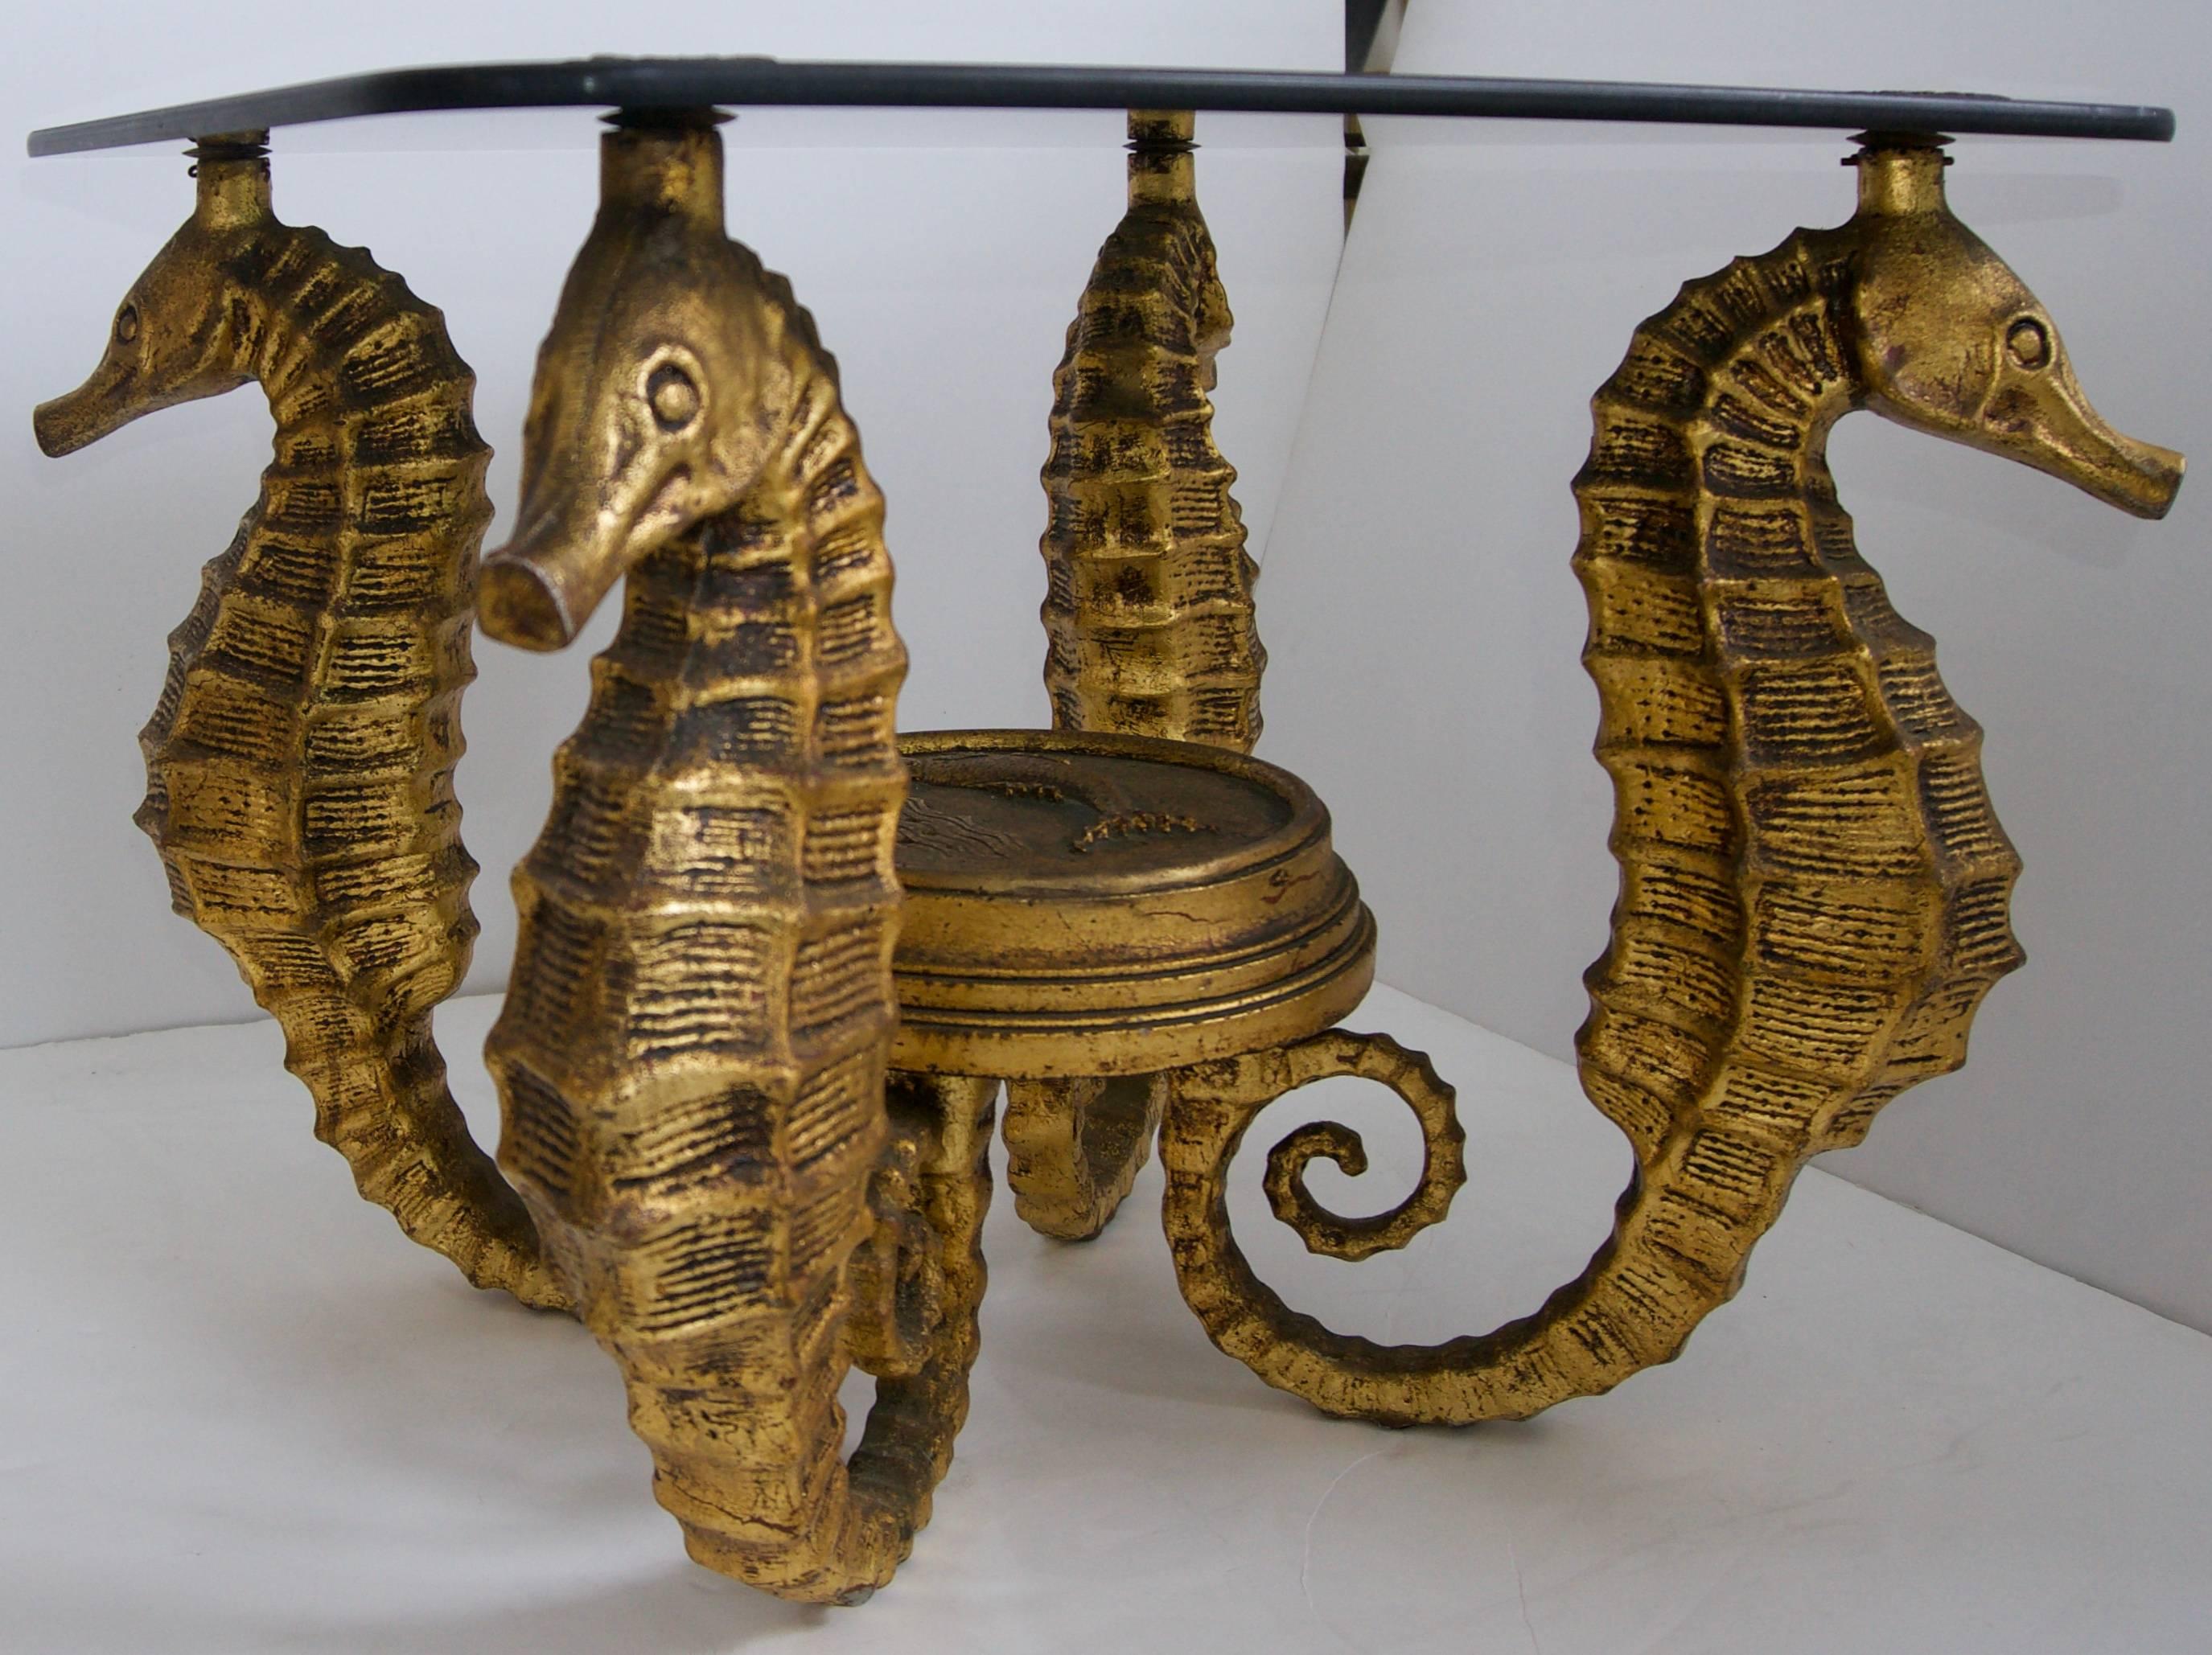 This stylish pair of tables were recently acquired from a Palm Beach estate and are very much in the Art Deco style of the 1920s and 1930s. And very easily could have been found on the Ile de France. The seahorse form is graceful and whimsical and